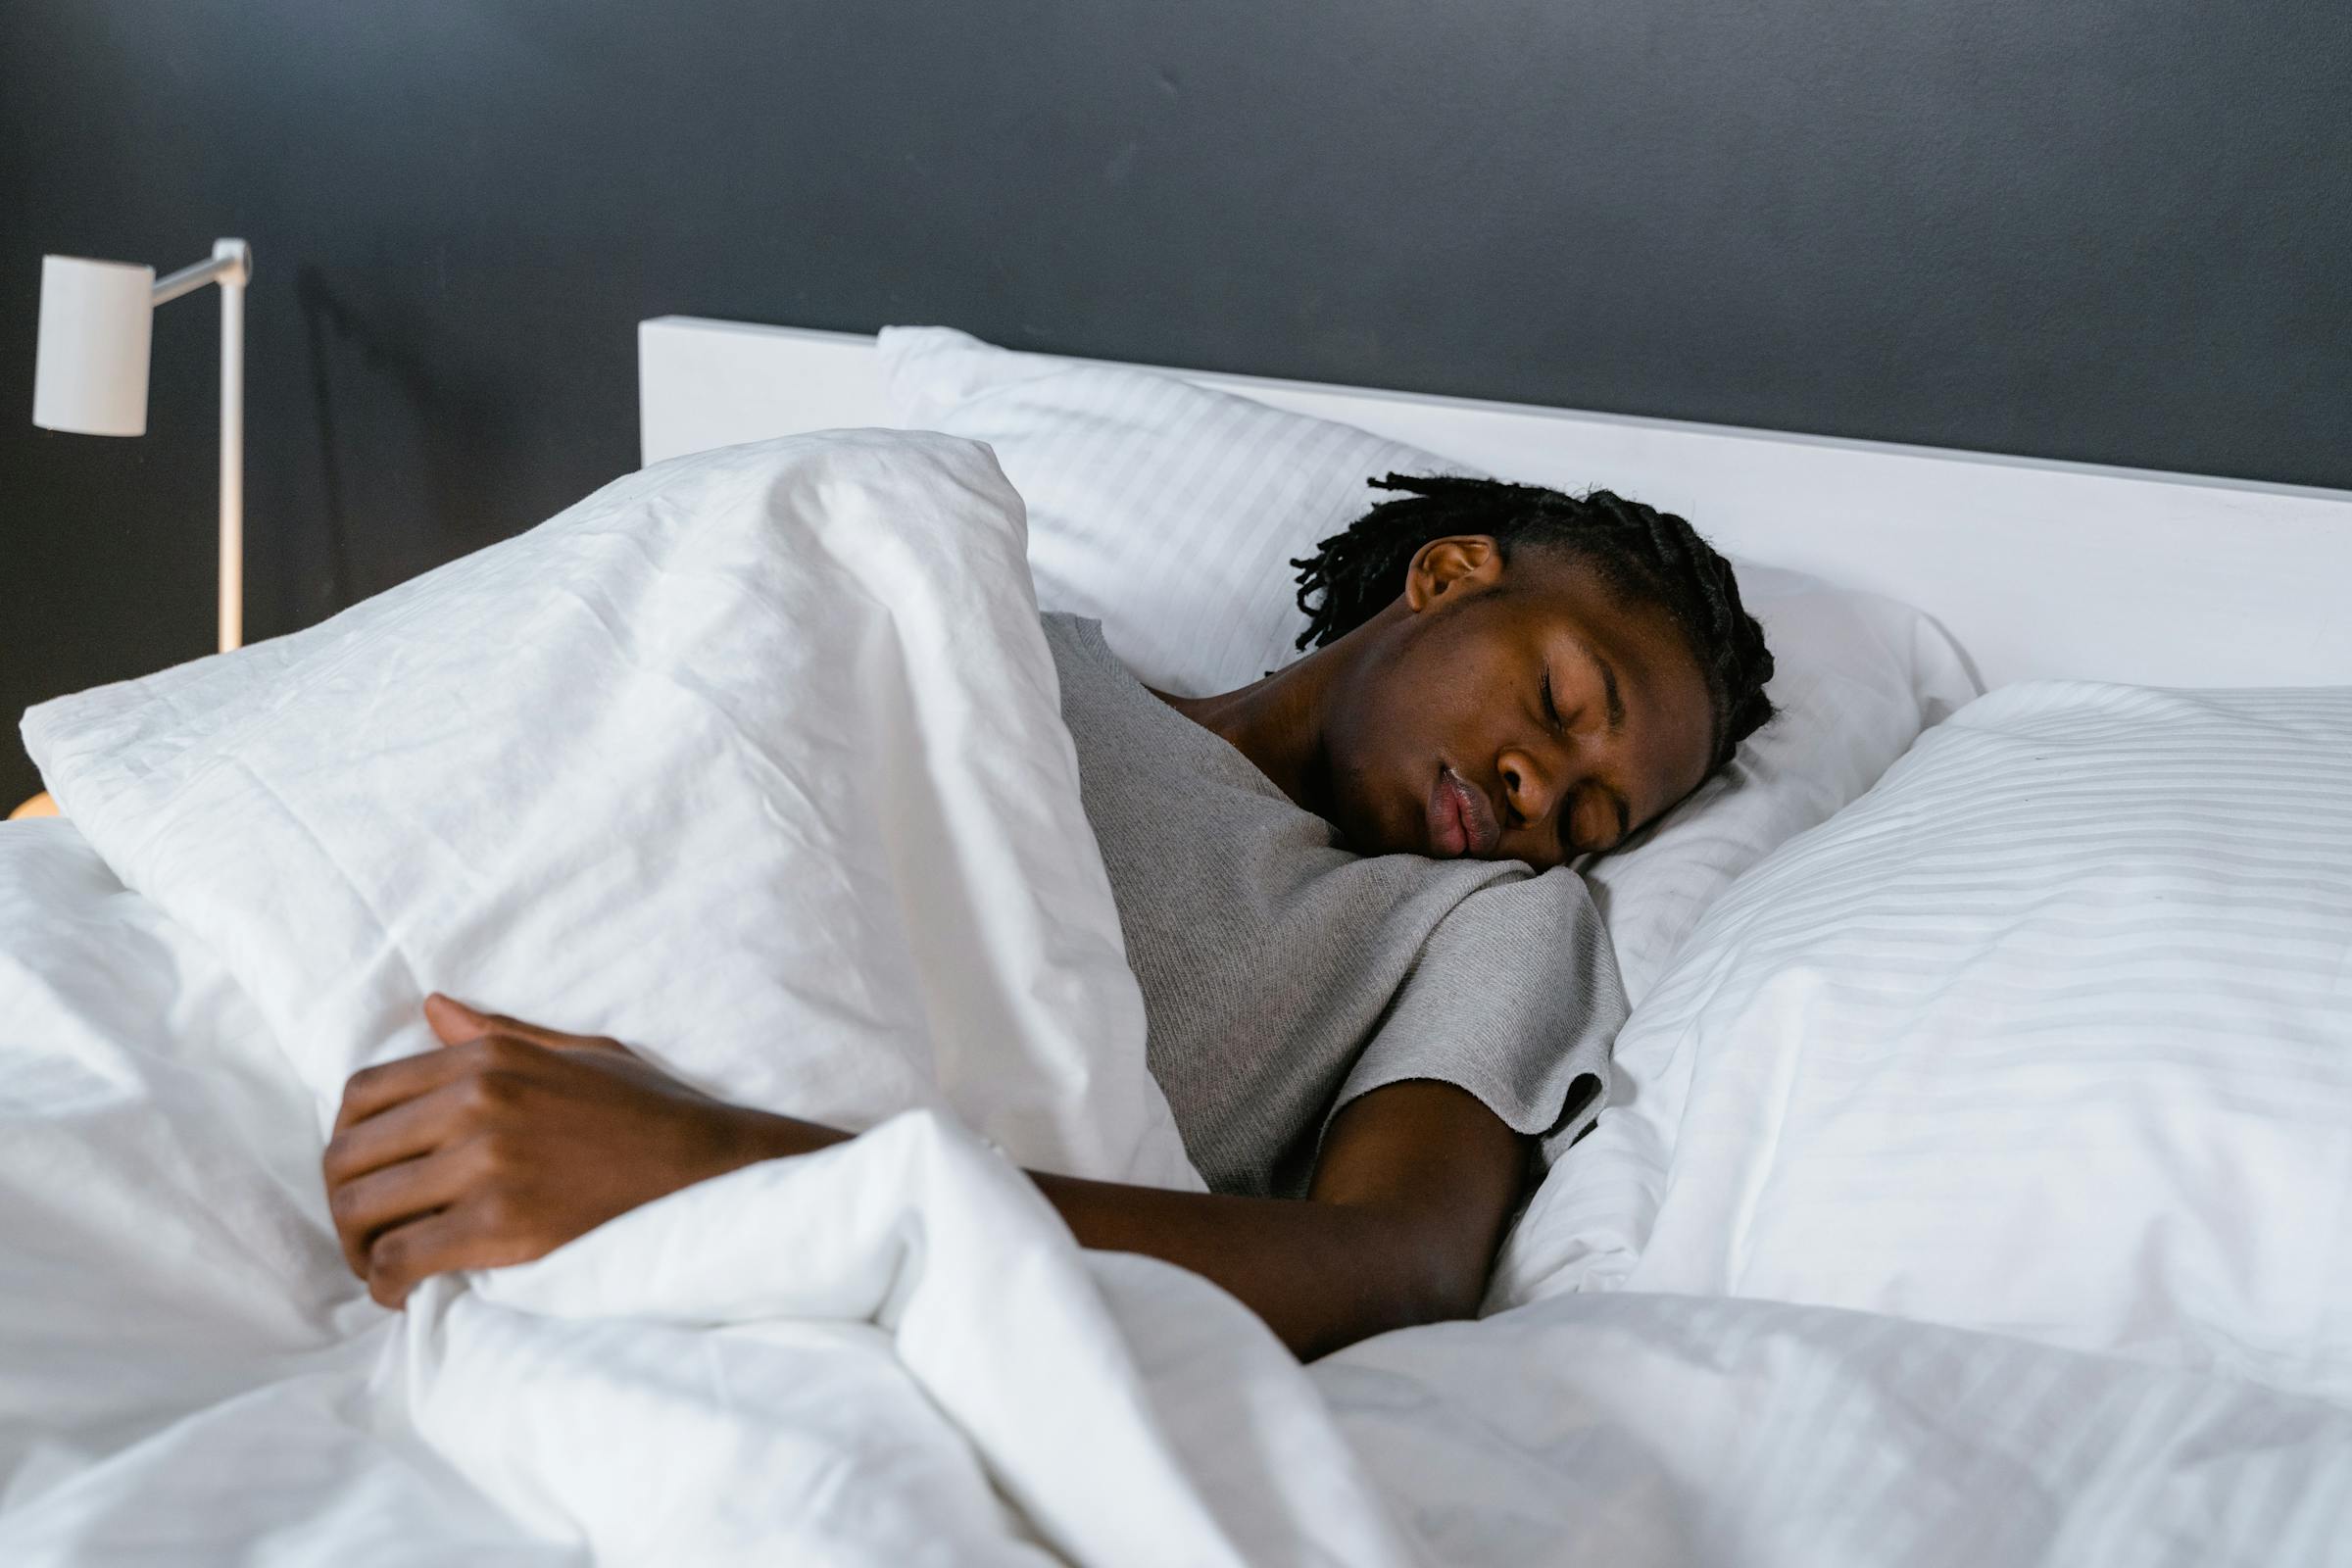 A man sleeping in a bed | Source: Pexels